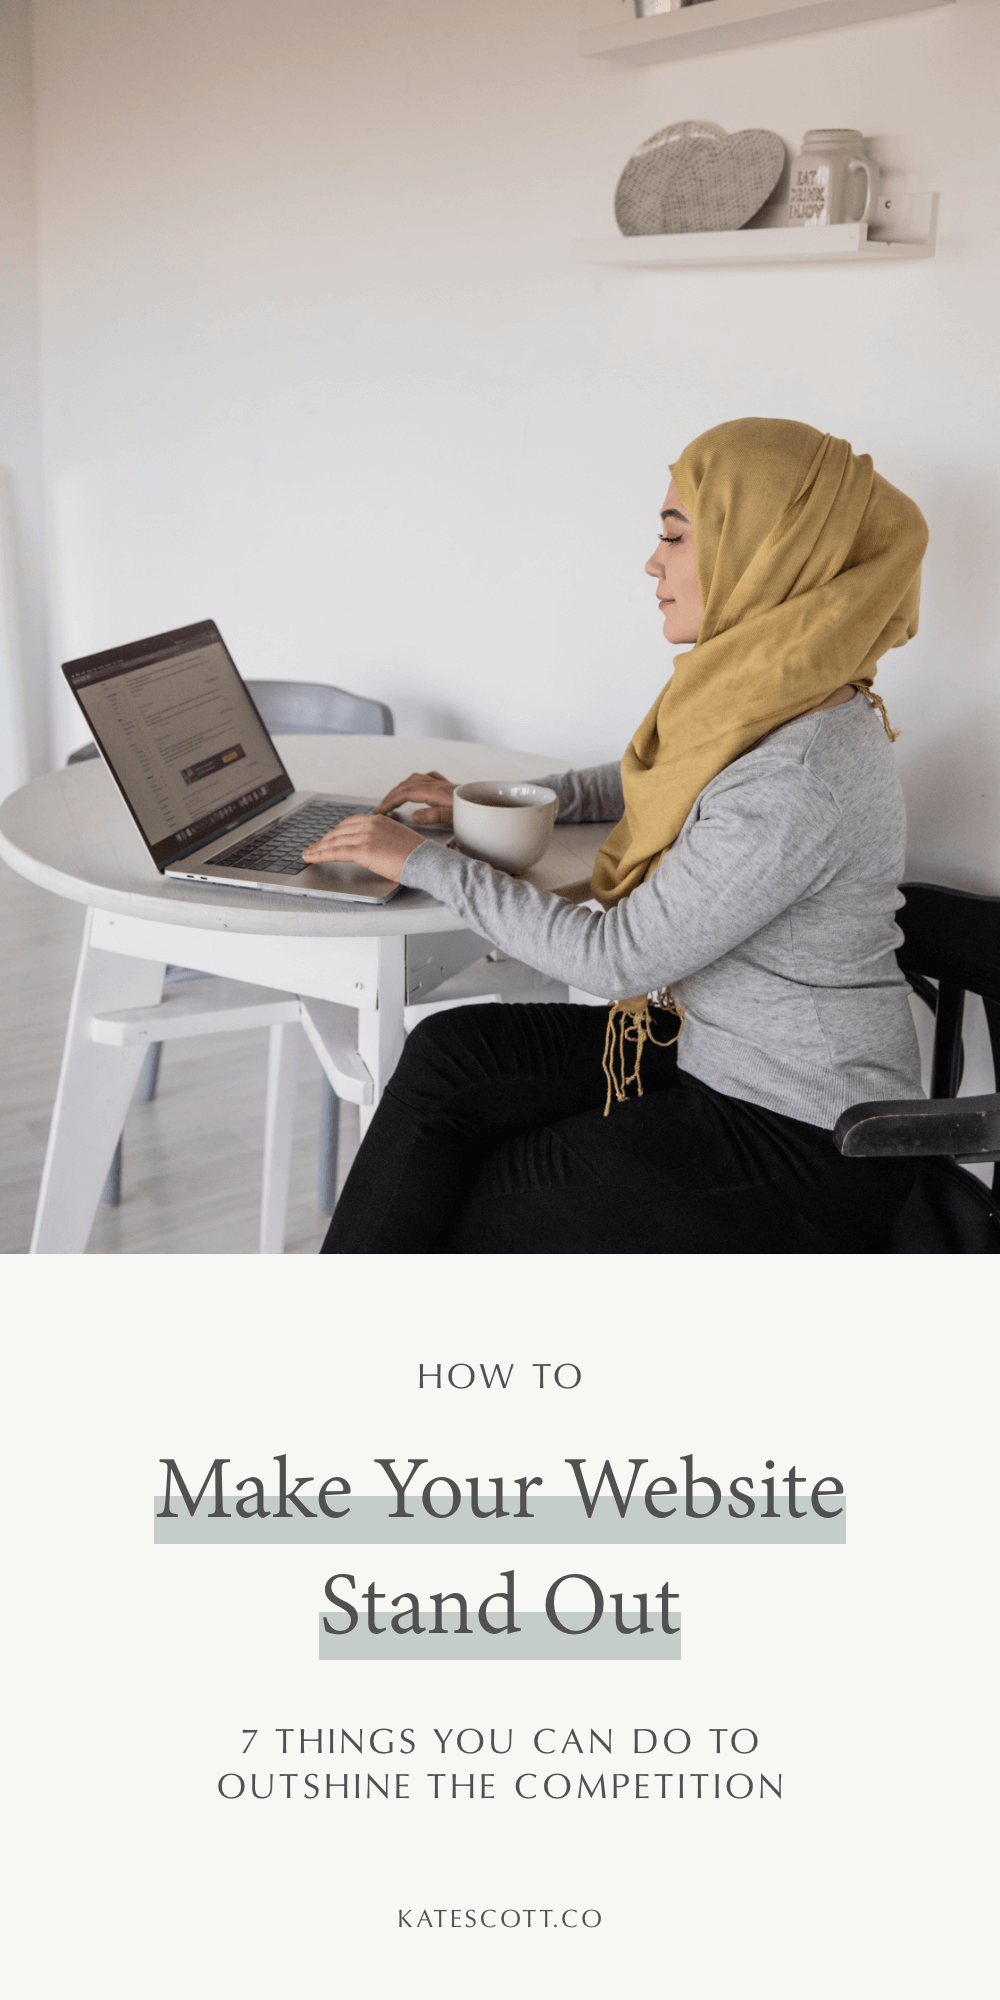 Looking for ways to make your website stand out from the competition? Here are 7 things you can do to make it better! | Web Design Inspiration Creative | Web Design Tips | Web Design Layout | Web Design 2020 | Small Business Website Design | Small B…